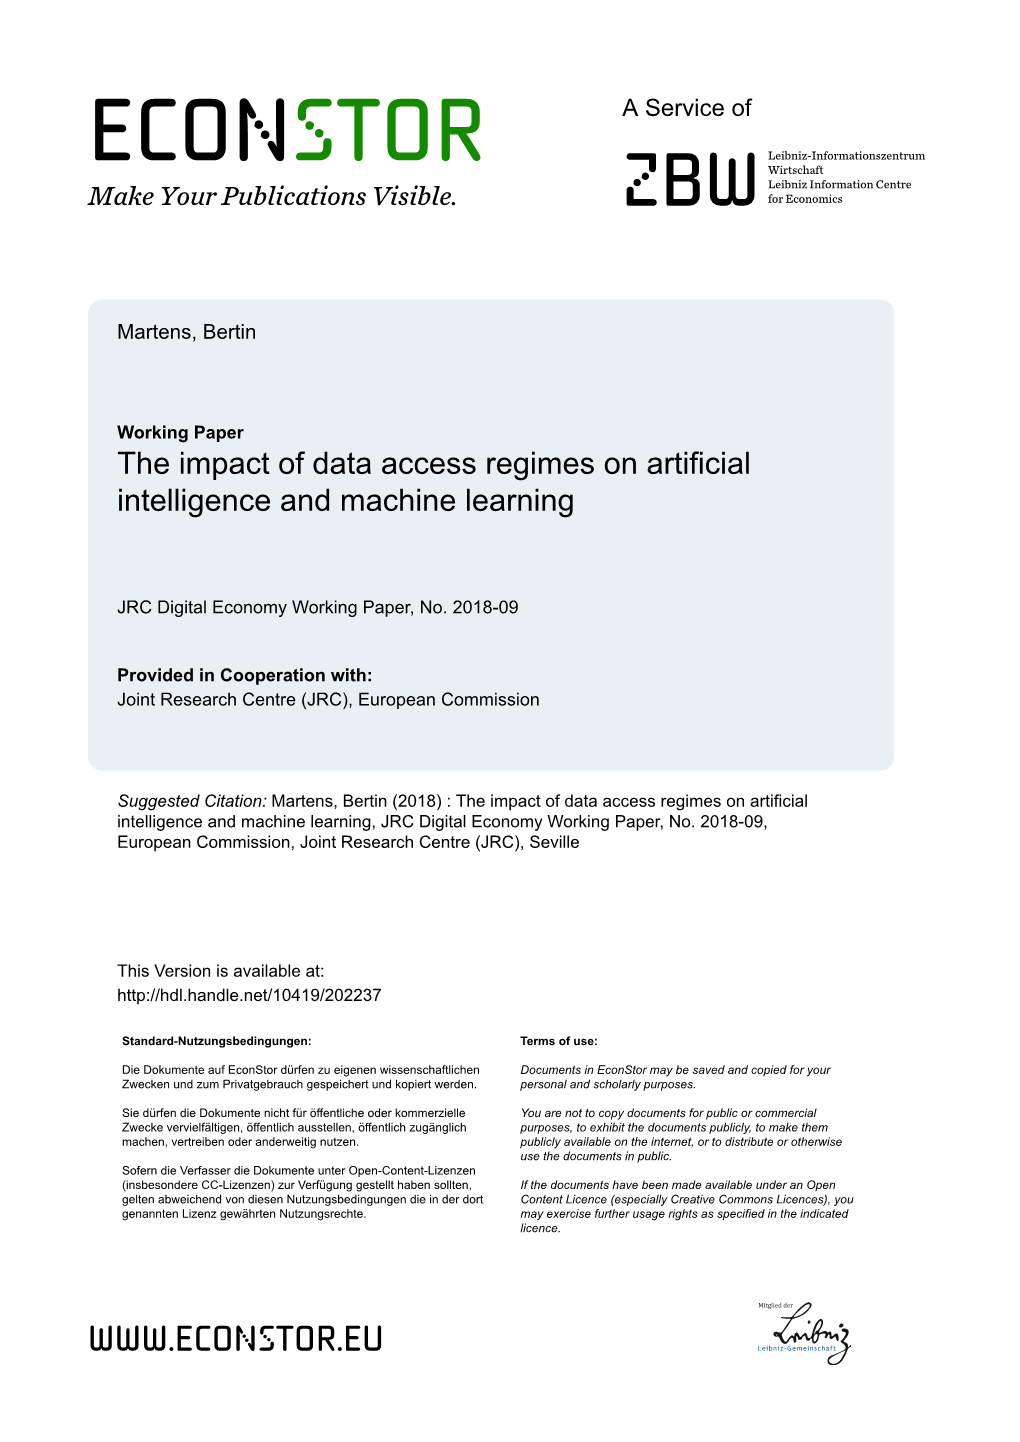 The Impact of Data Access Regimes on Artificial Intelligence and Machine Learning